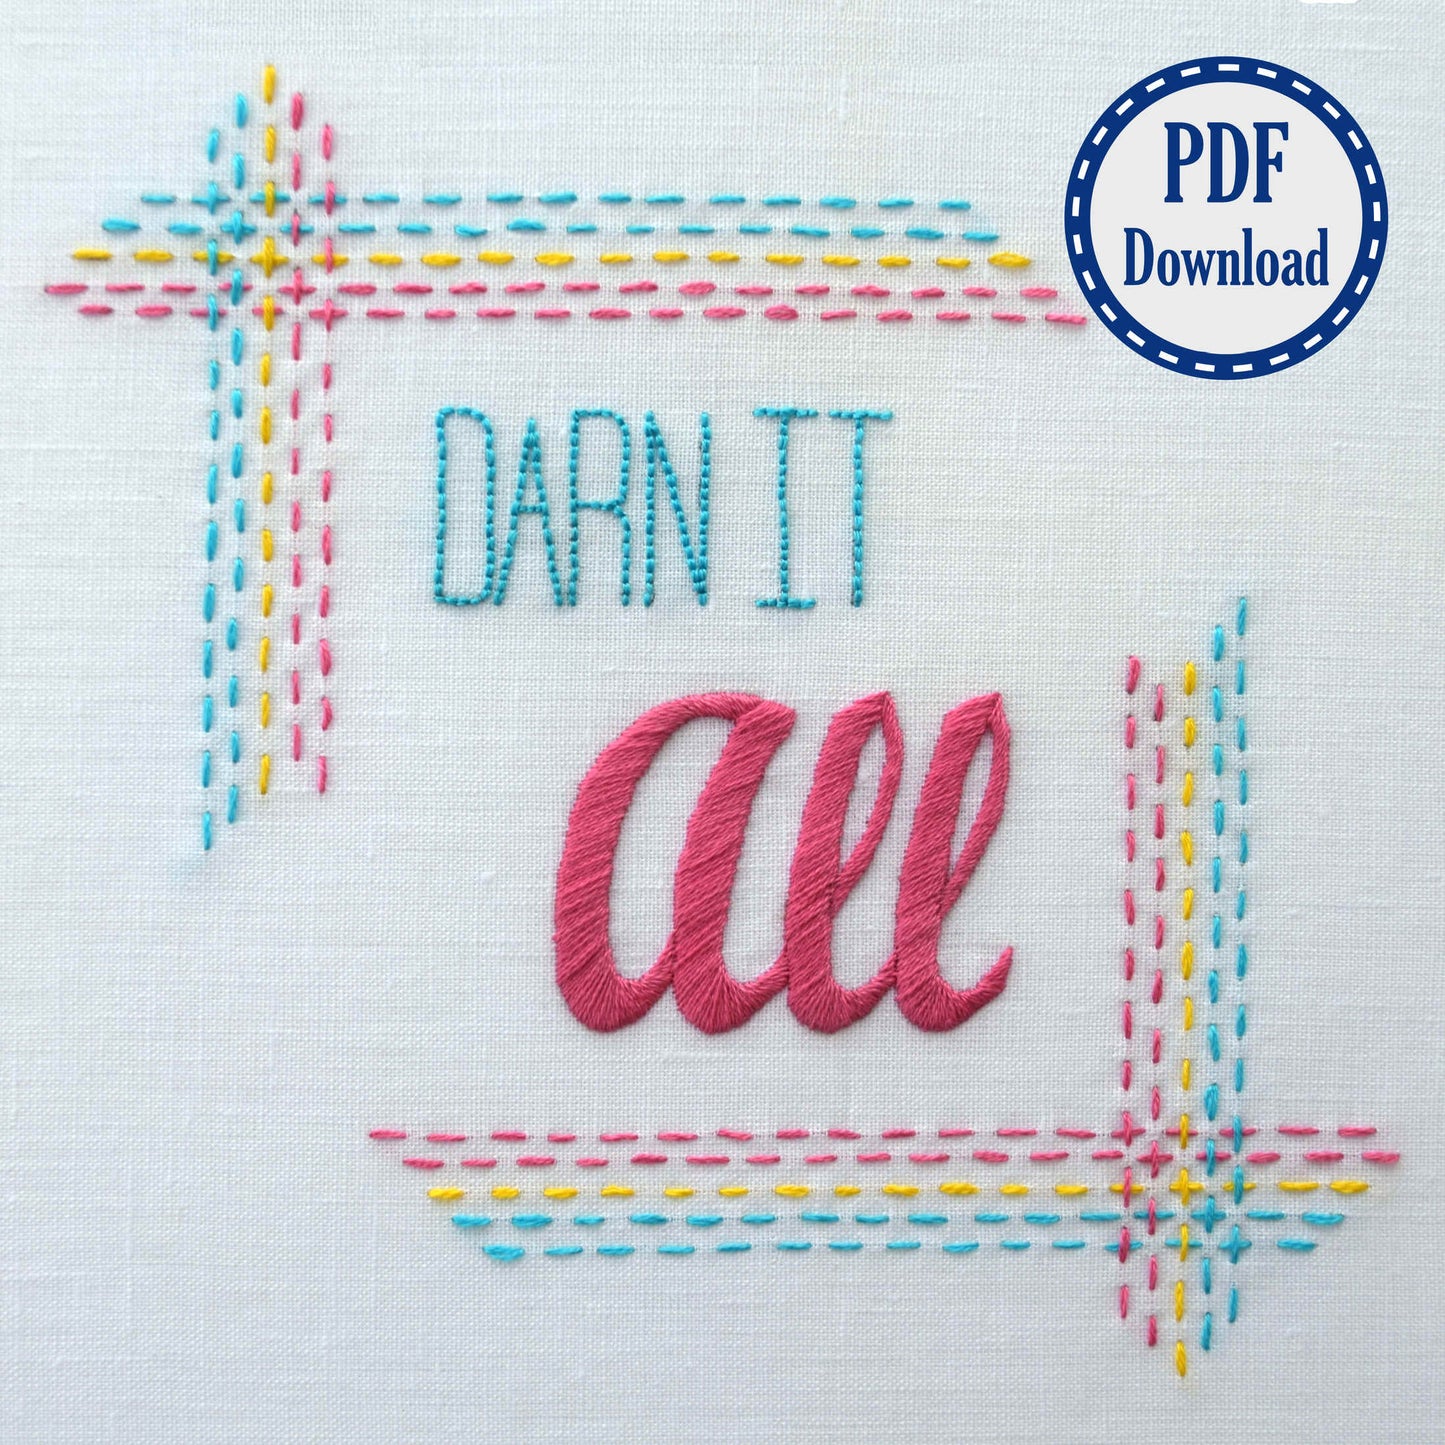 Closeup of Darn it All embroidery design on white linen. Frame is square and made of lines of running stitch in rainbow colors. Lettering is back stitch and satin stitch for a modern look.